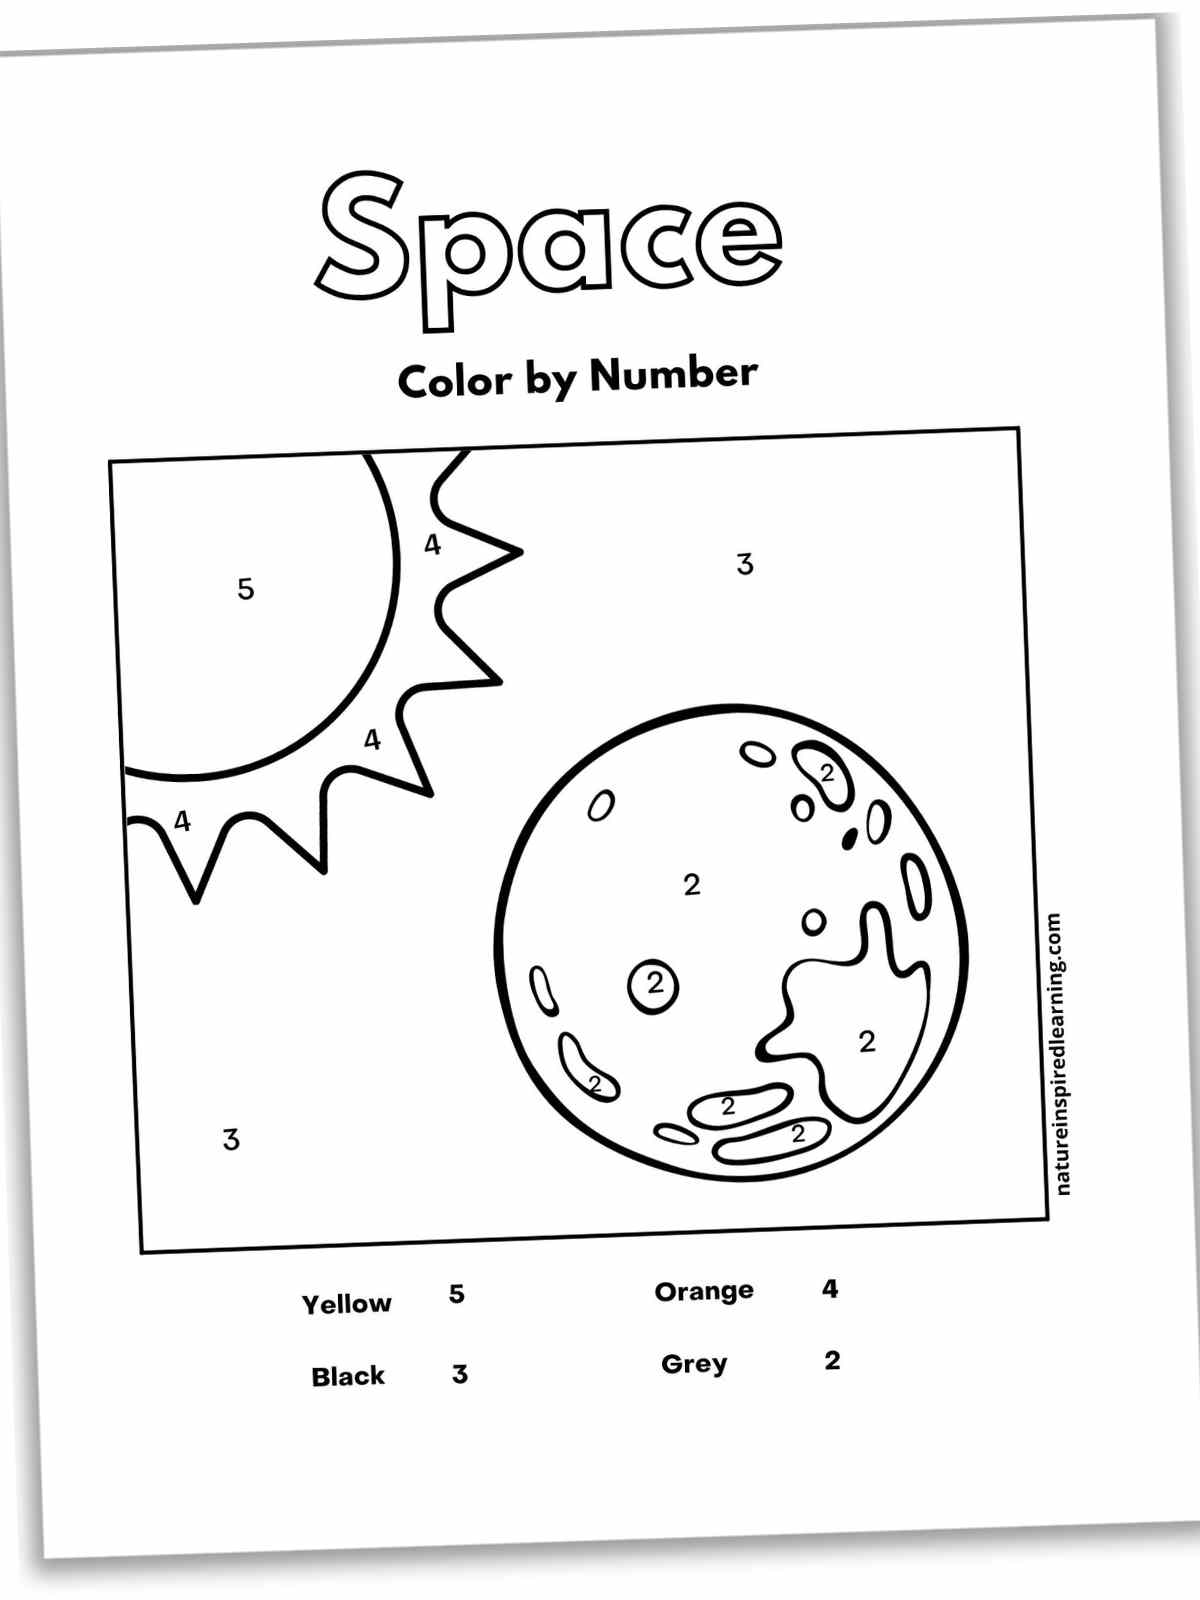 Black and white worksheet with Space written in outline form above the outline of the sun and moon. Number key at the bottom with numbers within the image.